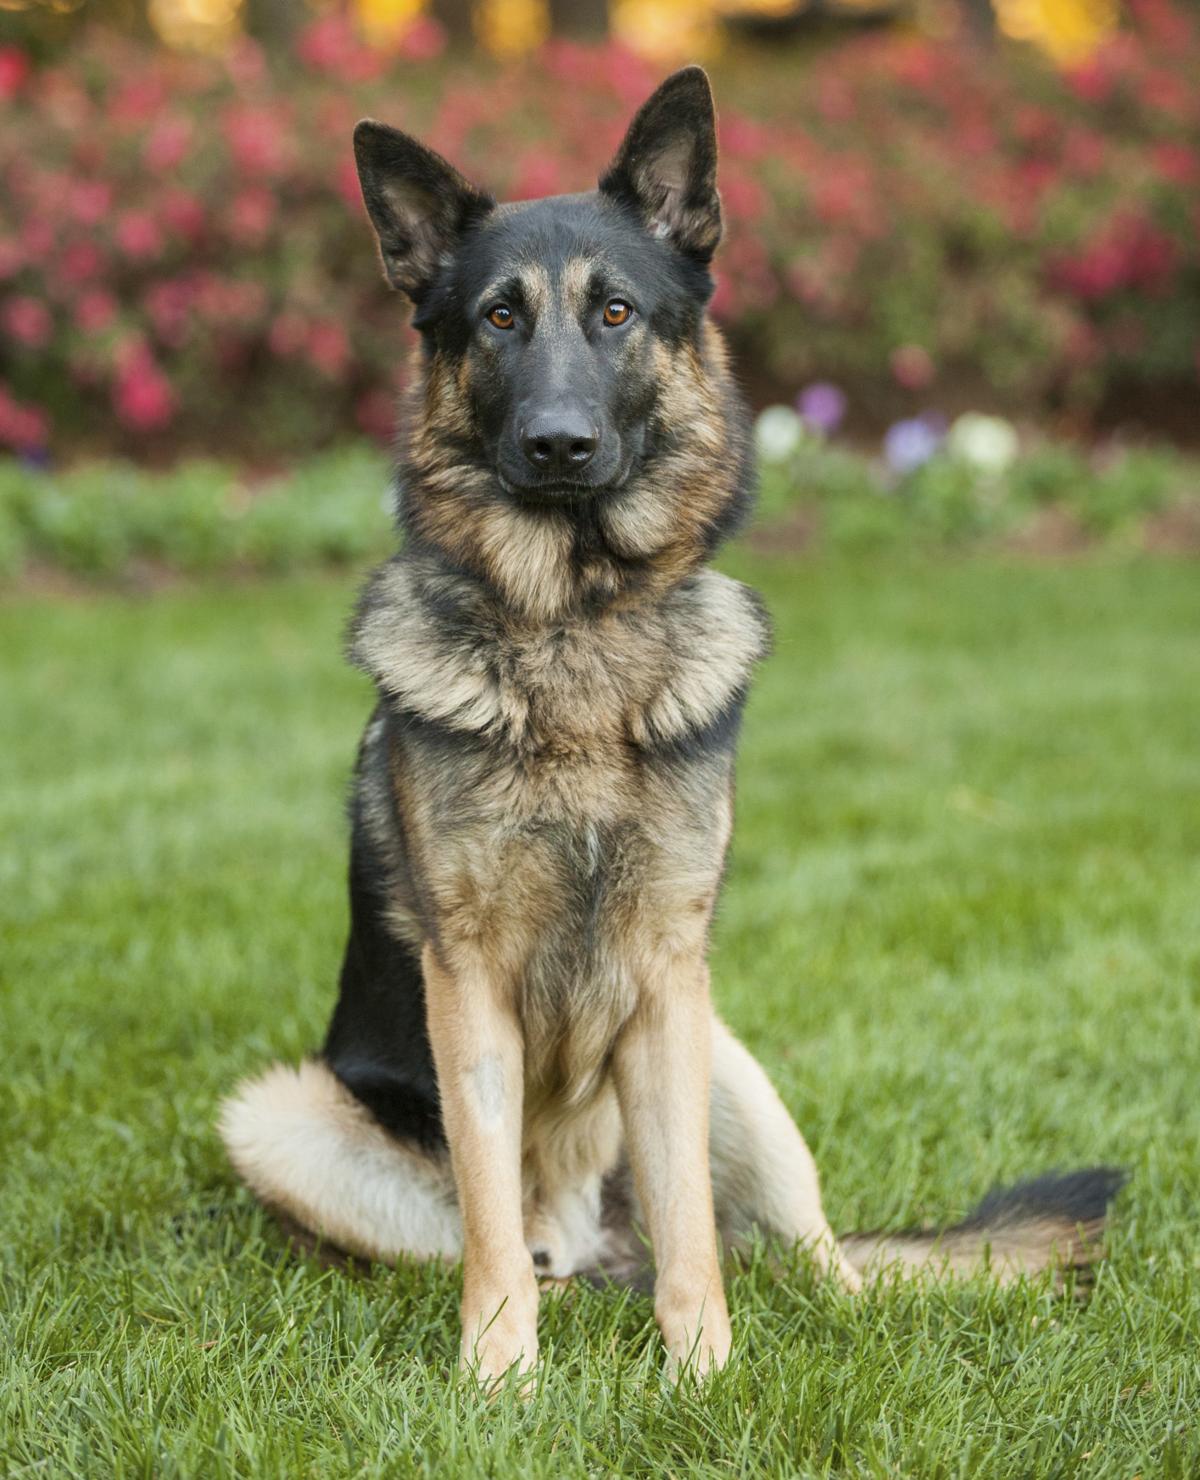 Want Information About the Great Dane-German Shepherd Mix? Read This